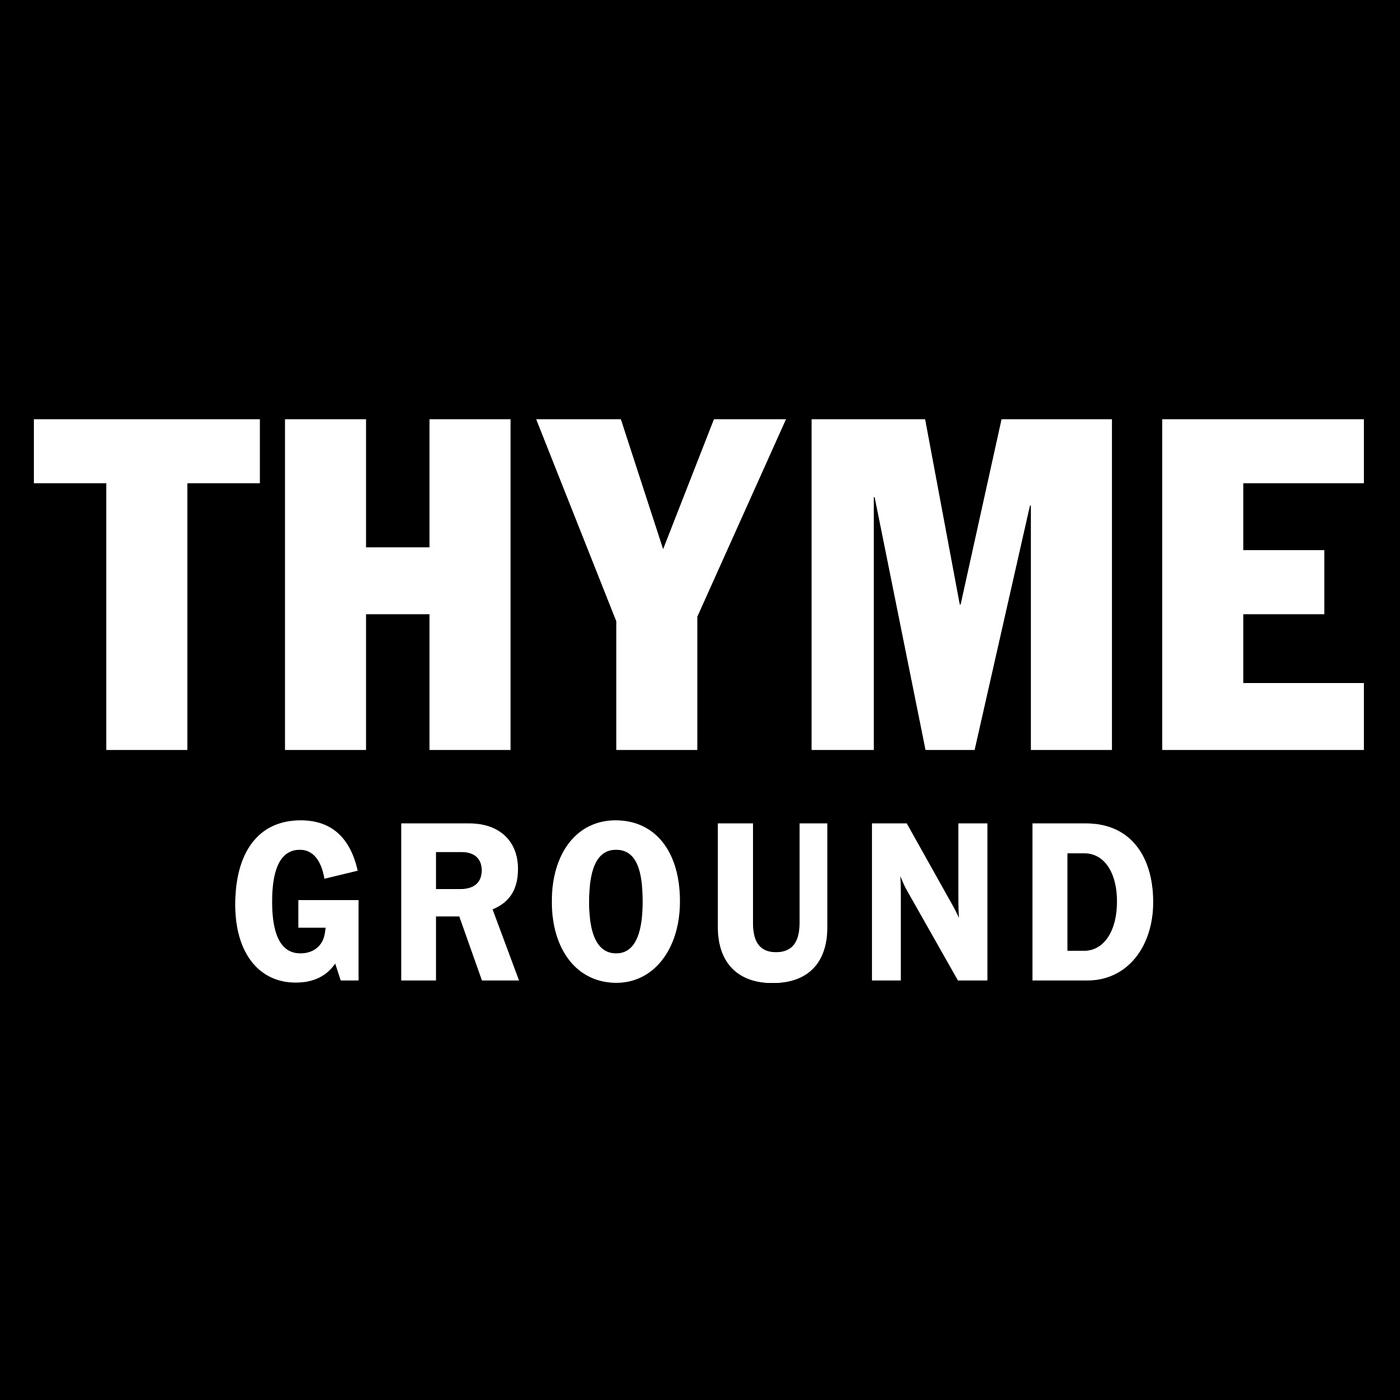 McCormick Ground Thyme; image 7 of 8